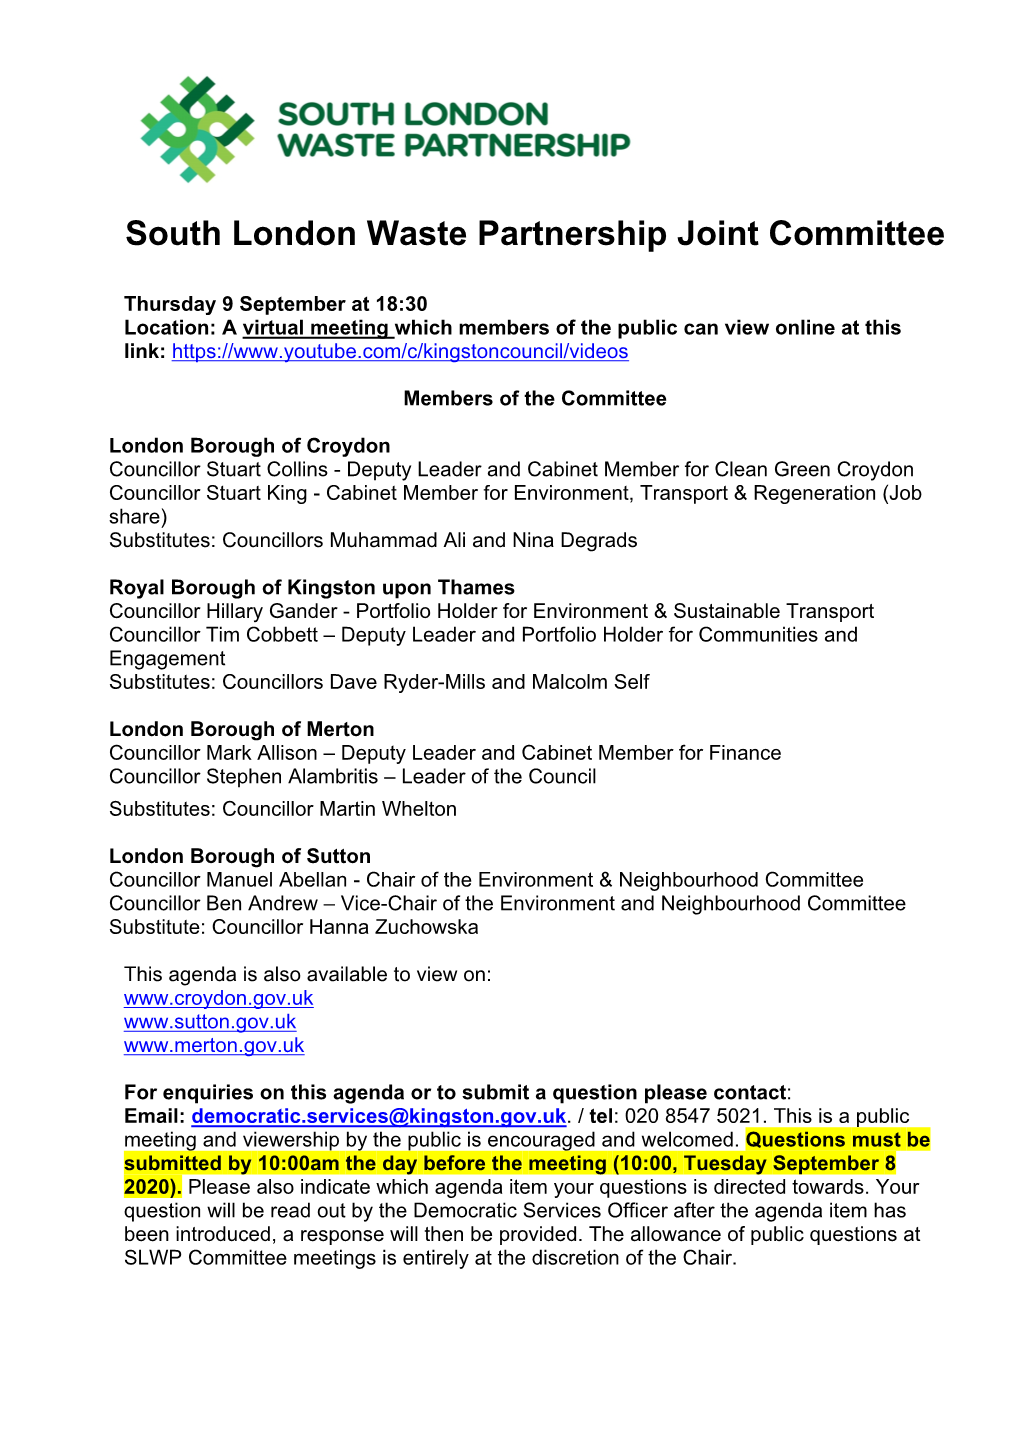 (Public Pack)Agenda Document for South London Waste Partnership Joint Committee, 09/09/2020 18:30